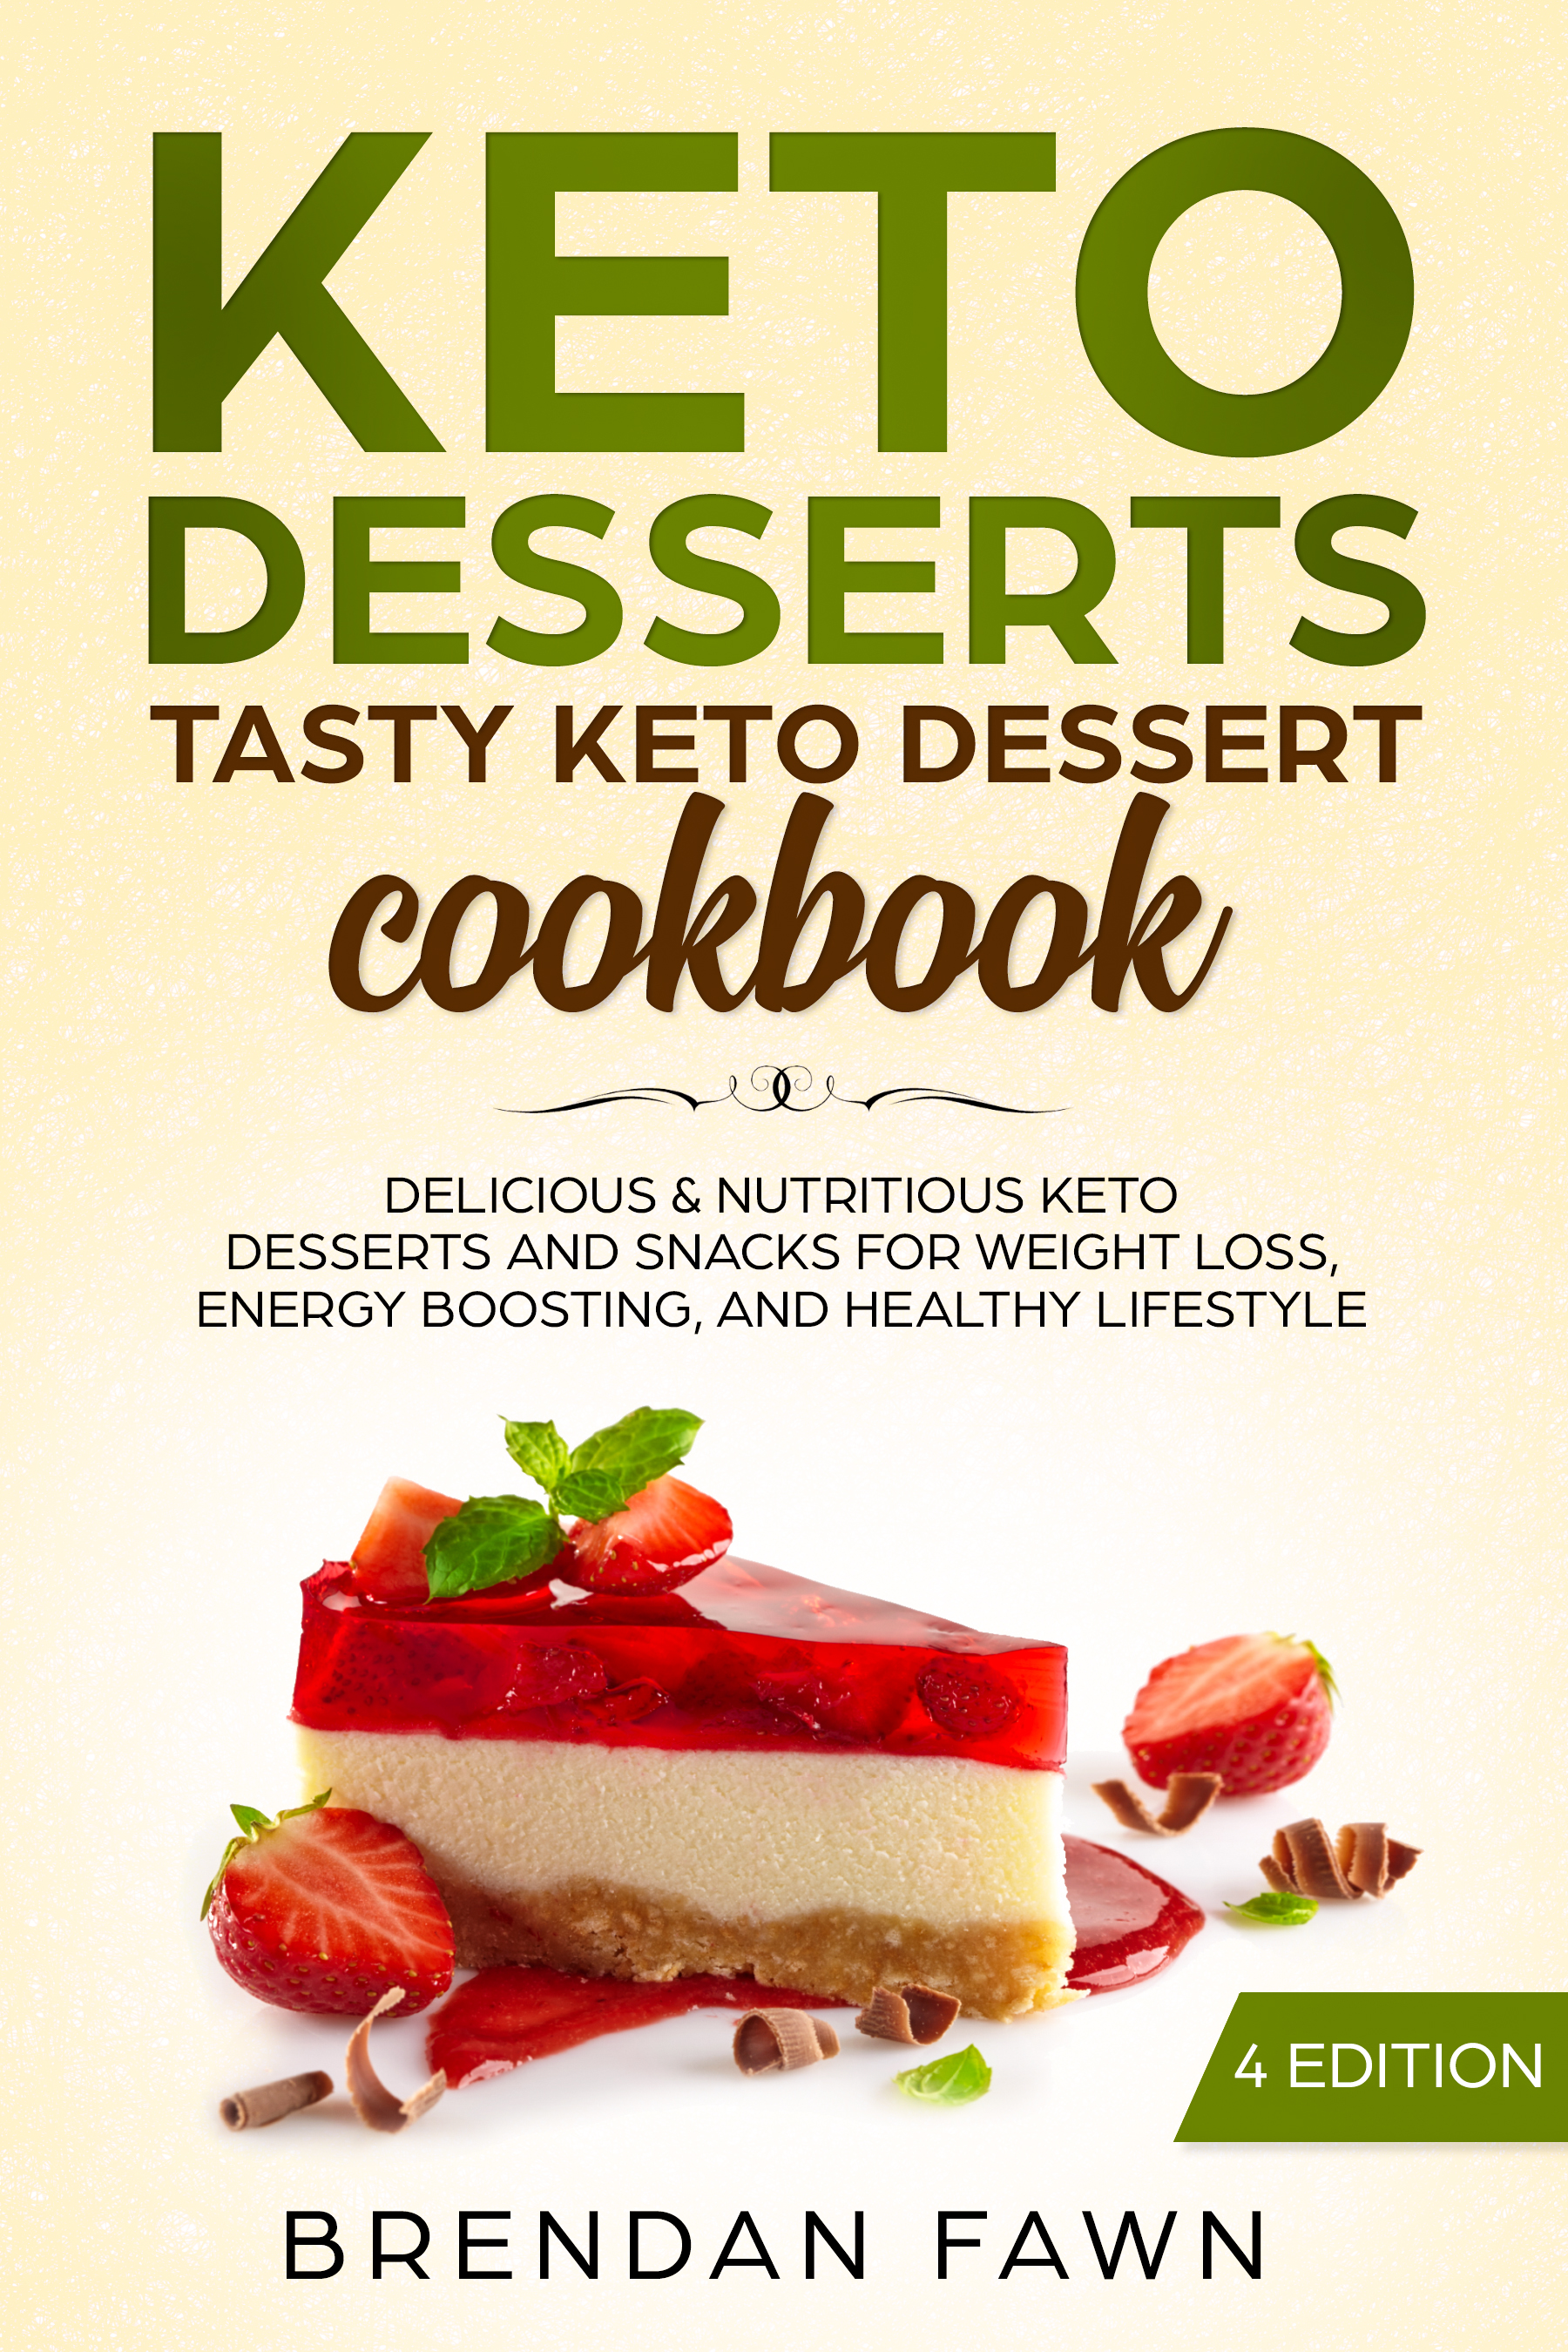 FREE: Keto Desserts: Tasty Keto Dessert Cookbook: Delicious & Nutritious Keto Desserts and Snacks for Weight Loss, Energy Boosting, and Healthy Lifestyle by Brendan Fawn